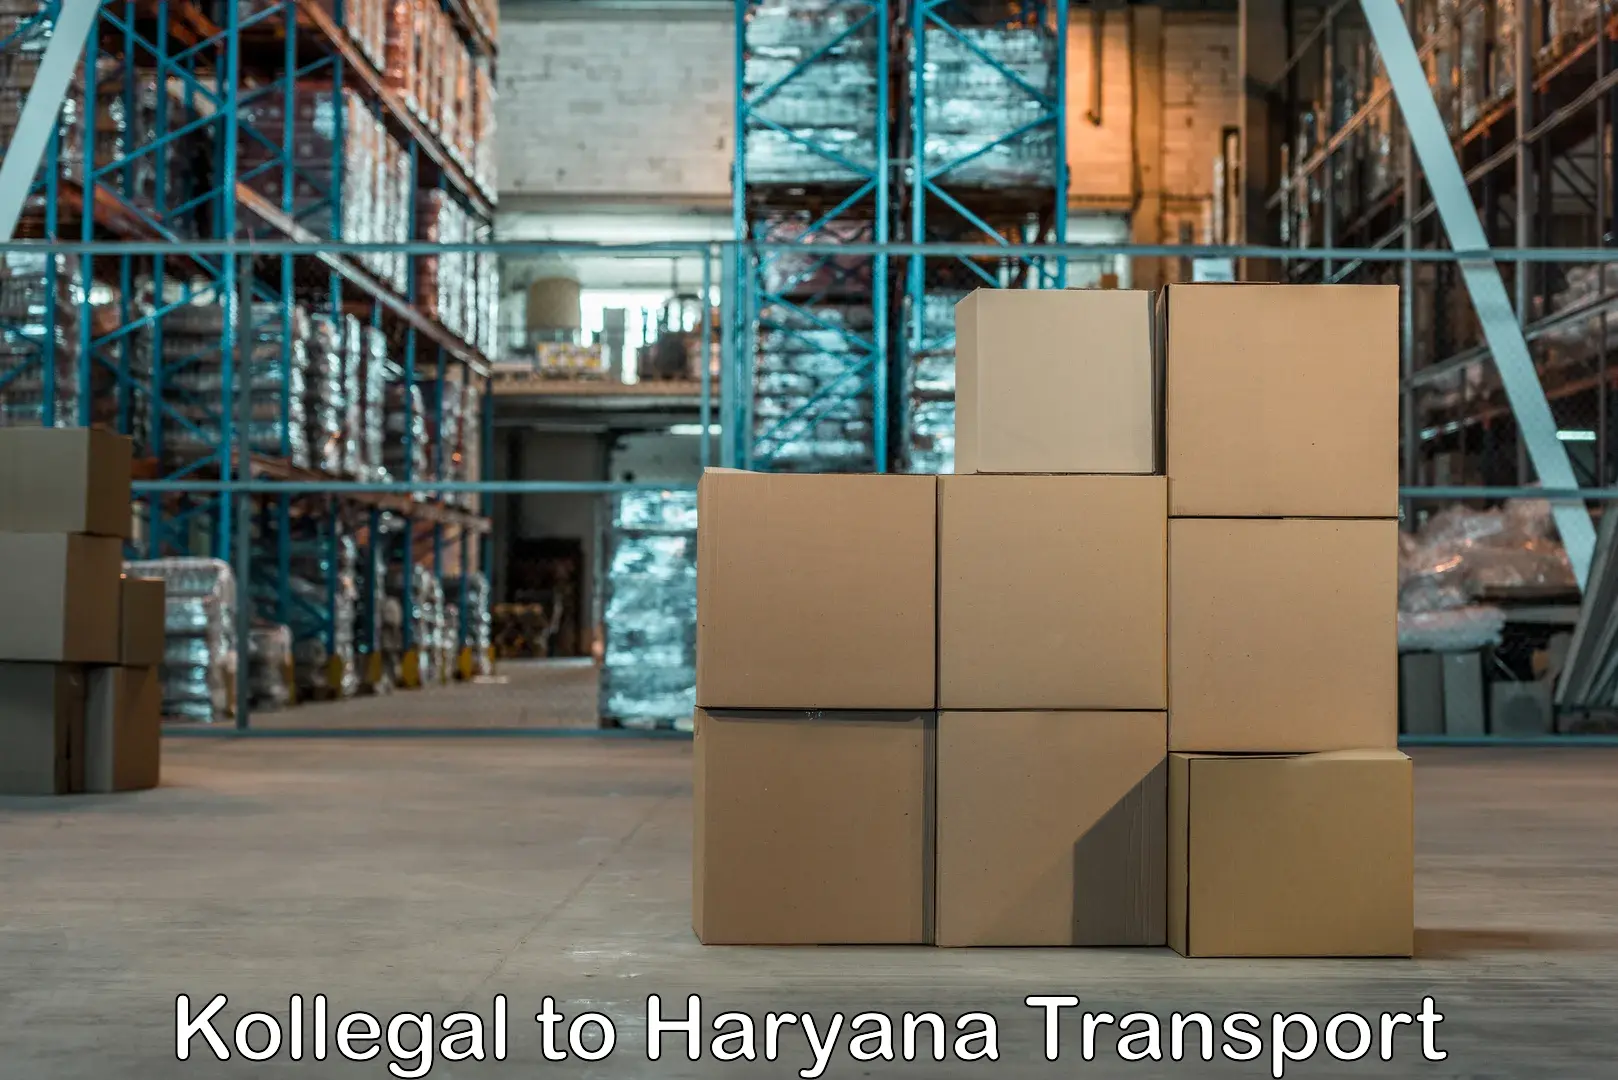 Transport shared services Kollegal to Haryana